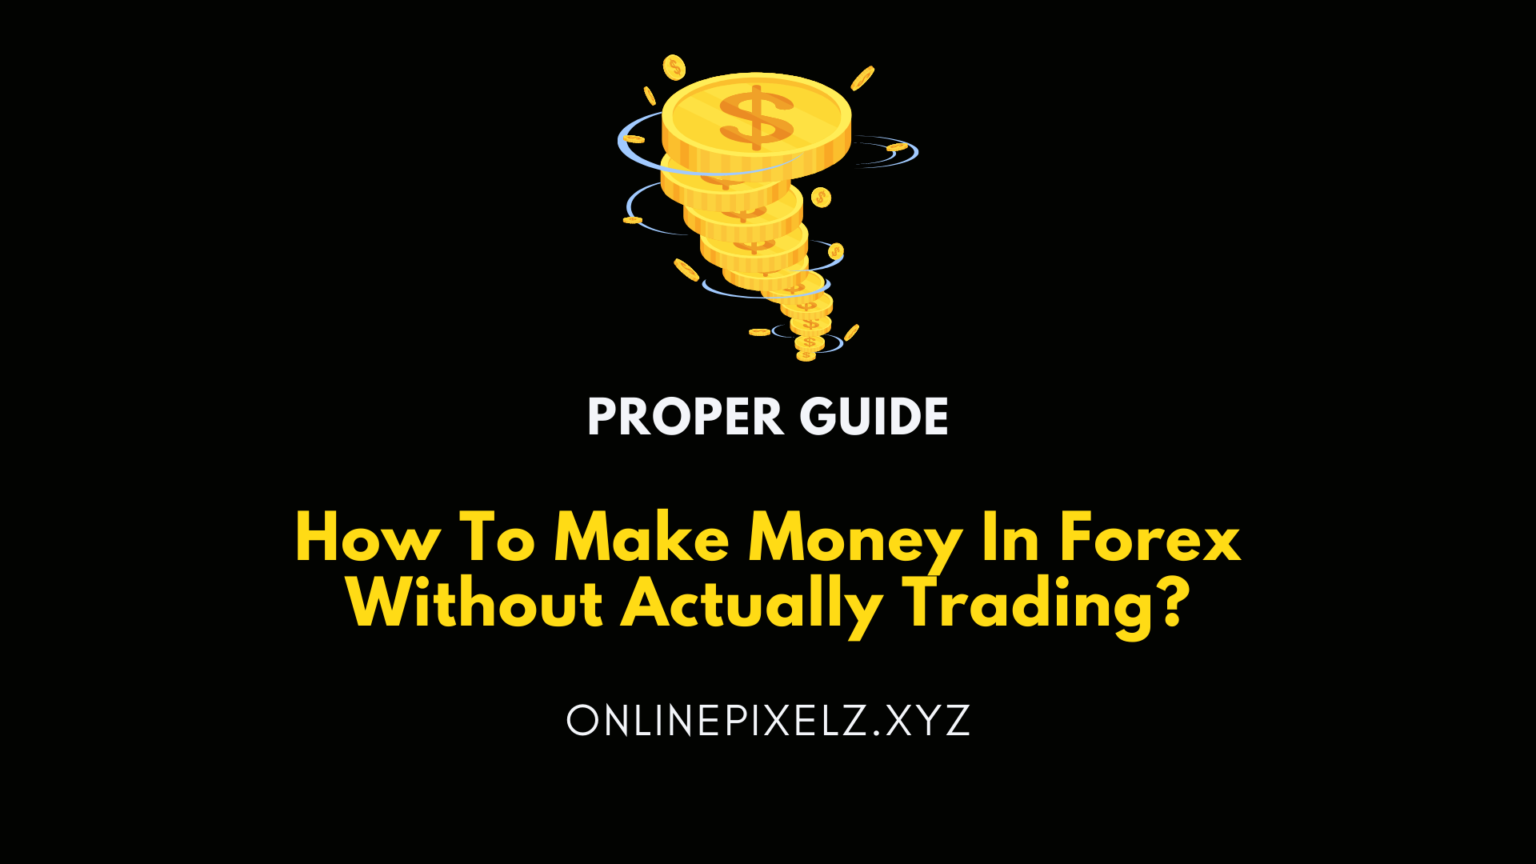 How To Make Money in Forex Without Actually Trading